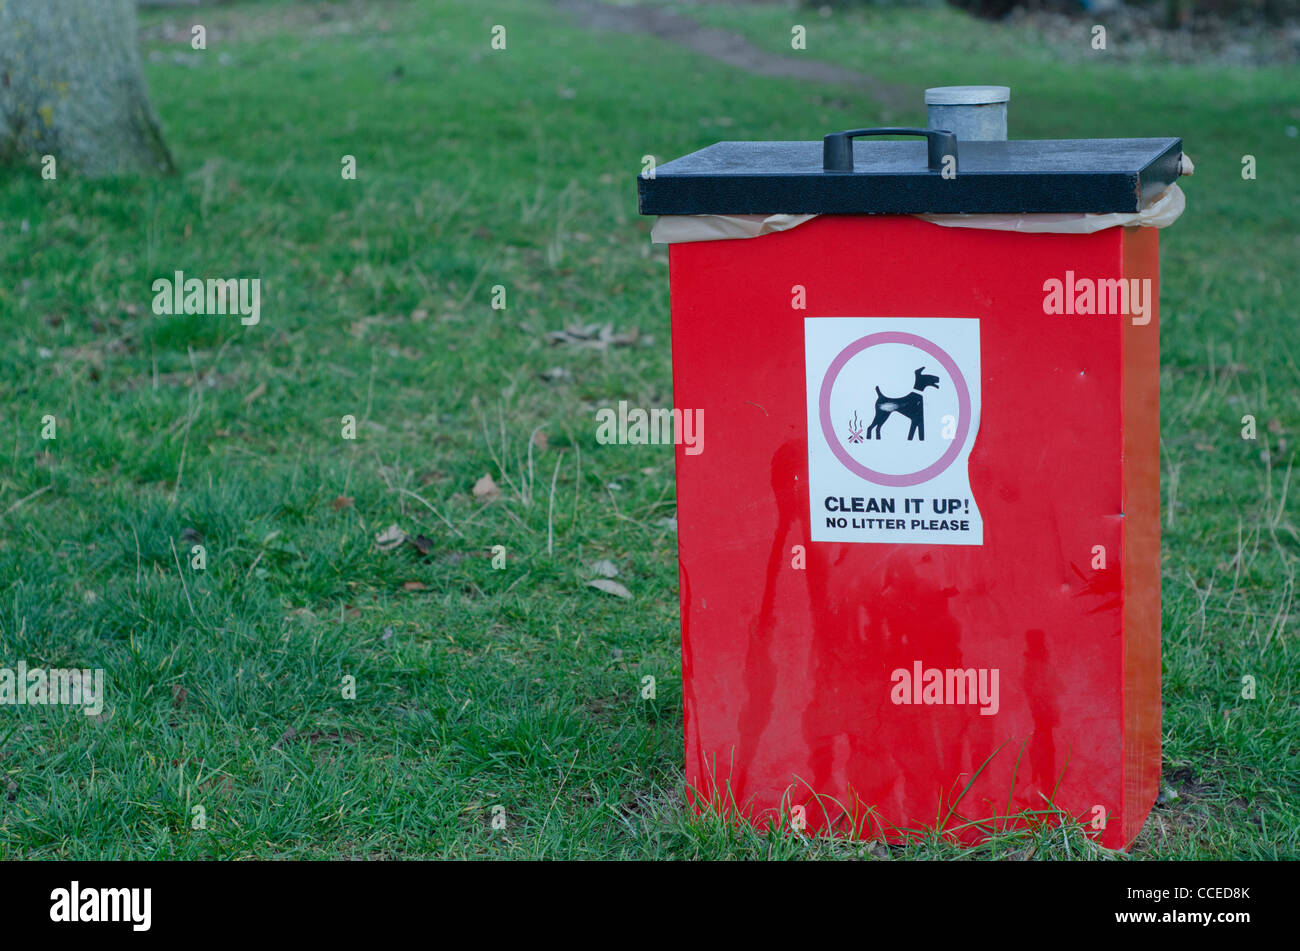 A bin for Dog feces. Picture by Pete Gawlik. Stock Photo